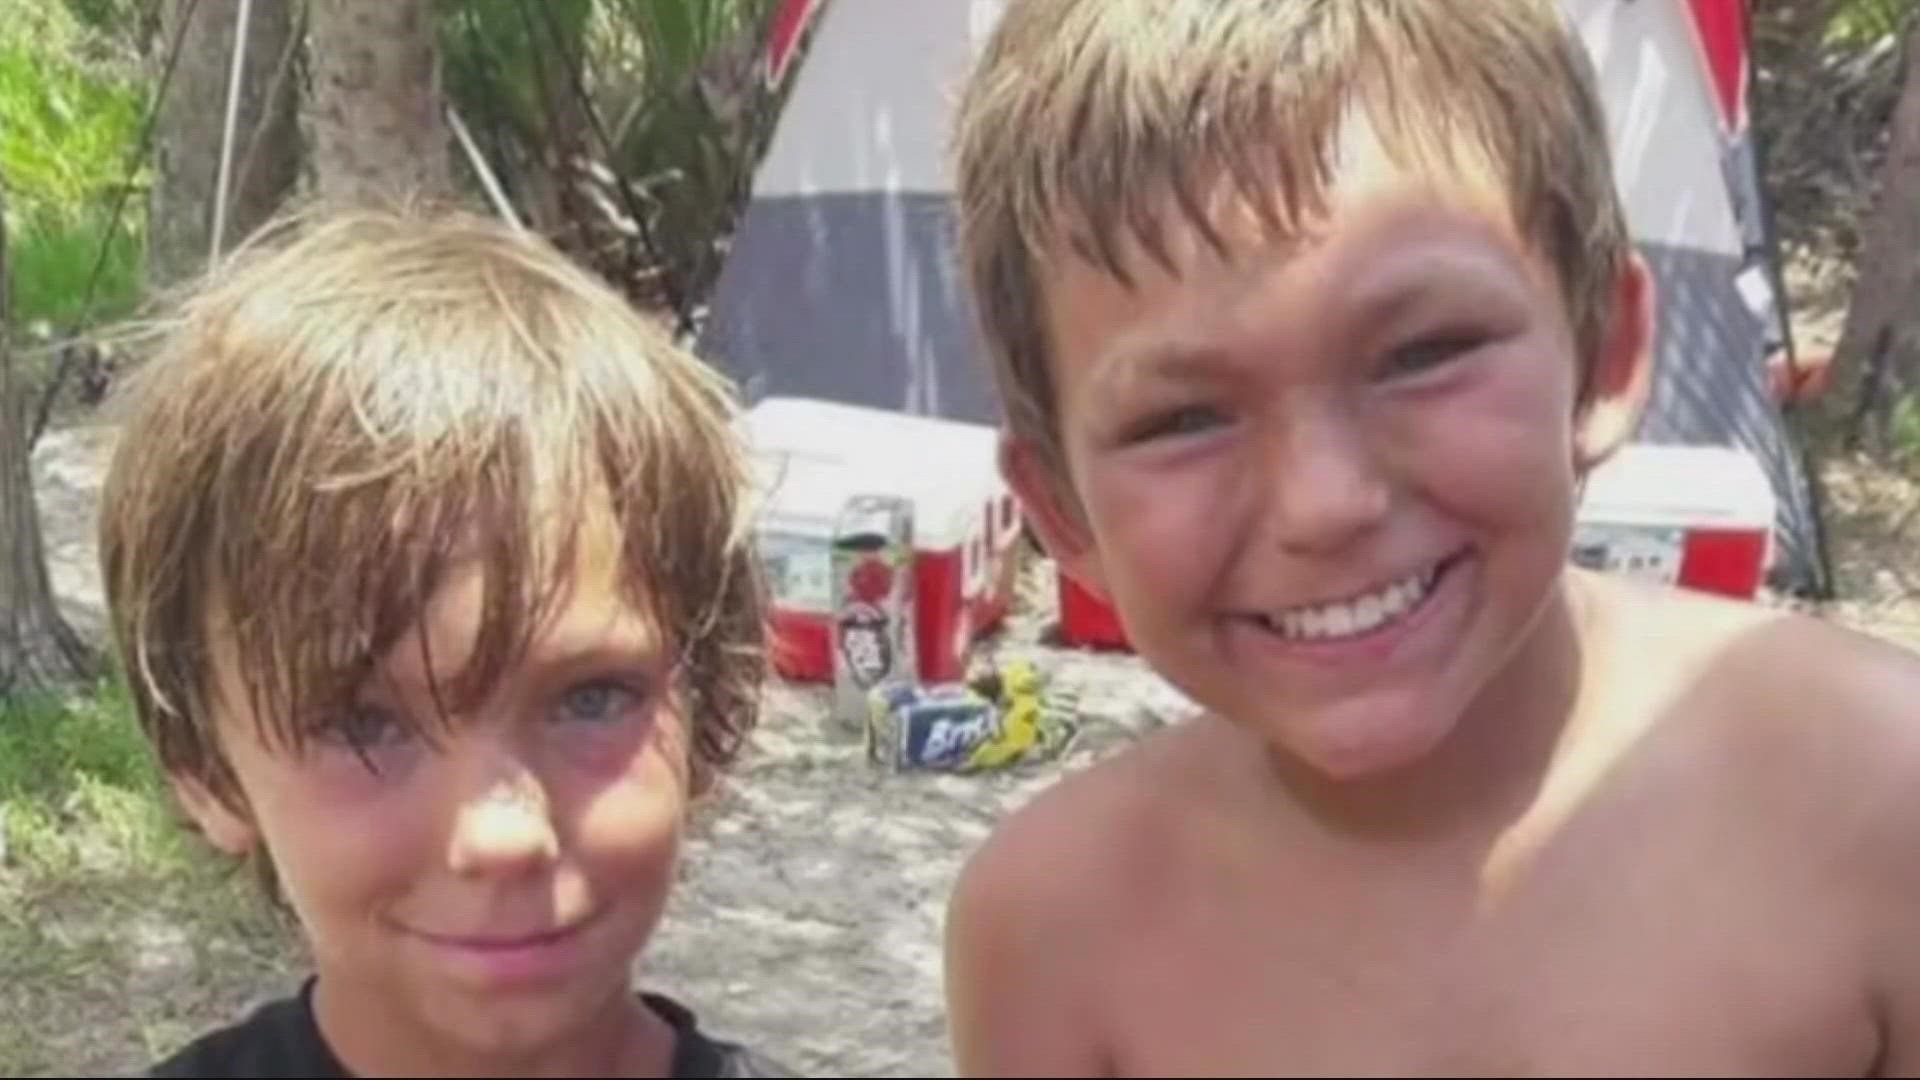 Tayten and Robert Baker were 14 and 12-years old when they were murdered in their home in Putnam County.